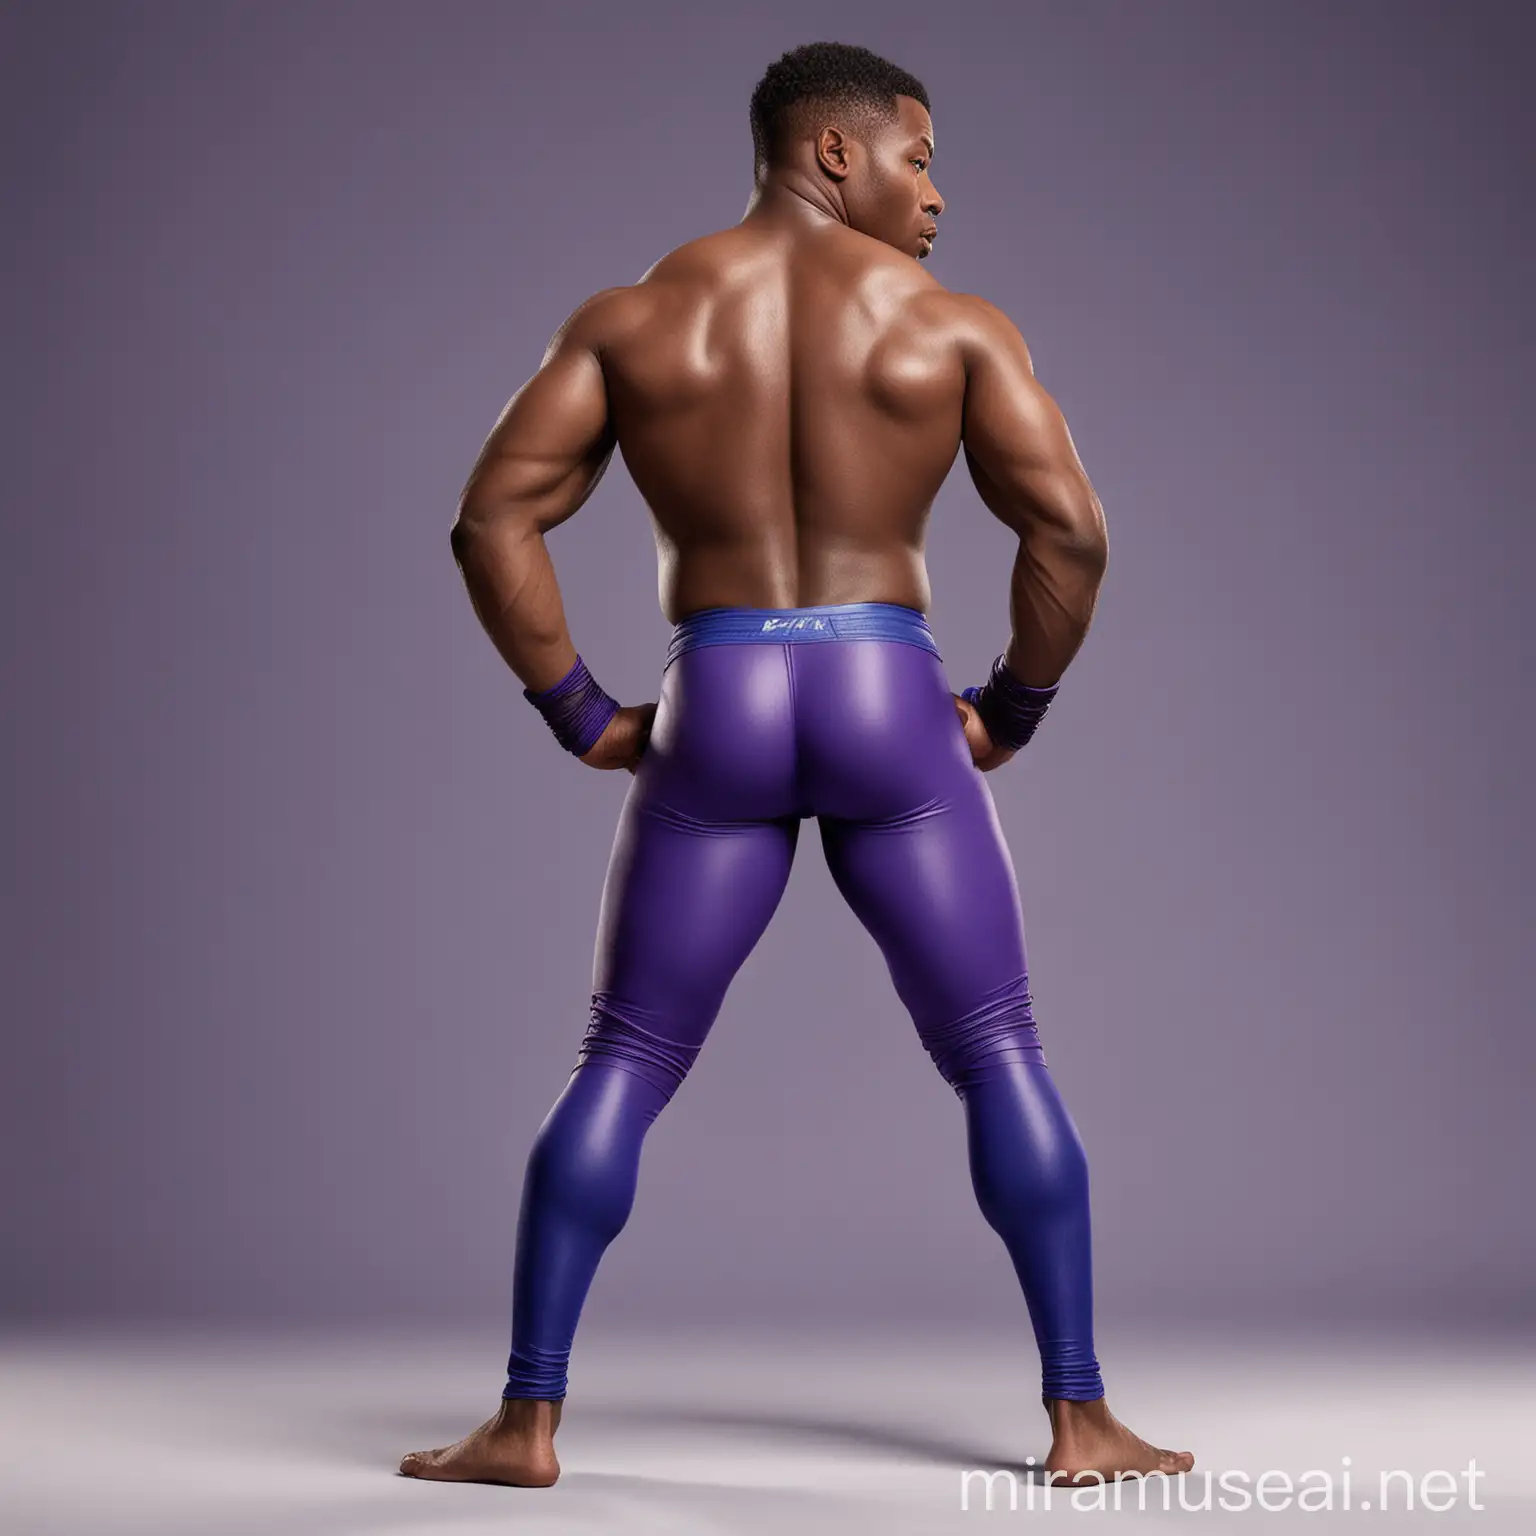 Charming shirtless muscular 30 year old male African American wrestler, with brown eyes, wearing  long cobalt blue (leaning to purple) and black spandex leggings, plus some energy wristbands. Rear view.  Pixar style art.